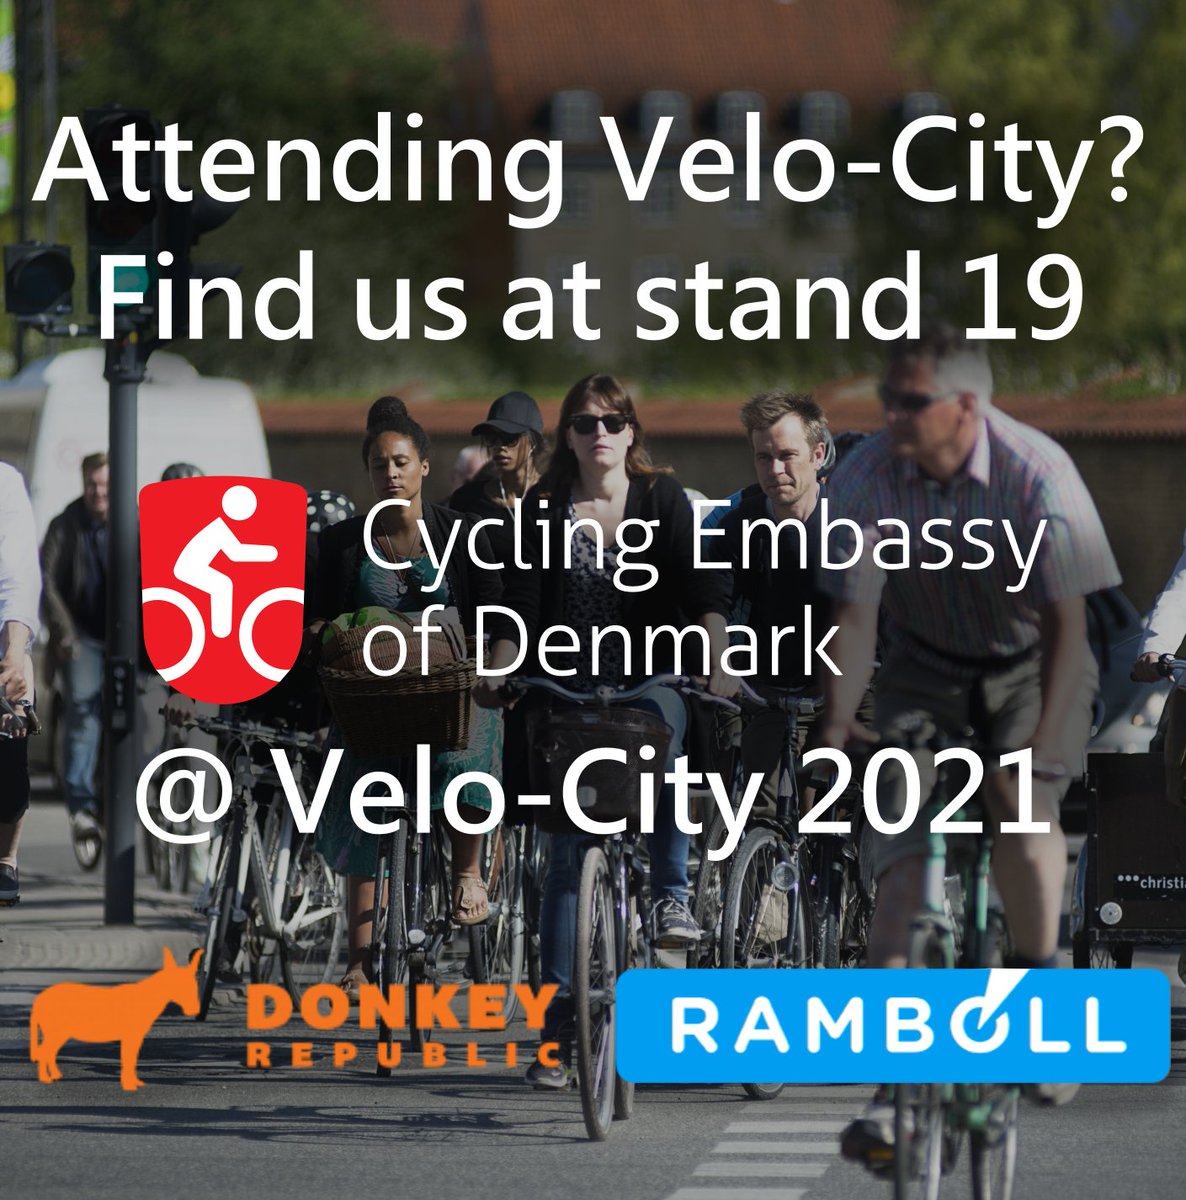 Attending Velo-city? Find us at stand 19 together with @ramboll @Donkey_Republic @VelocitySeries #Ljubljana 🇸🇮 #VC22